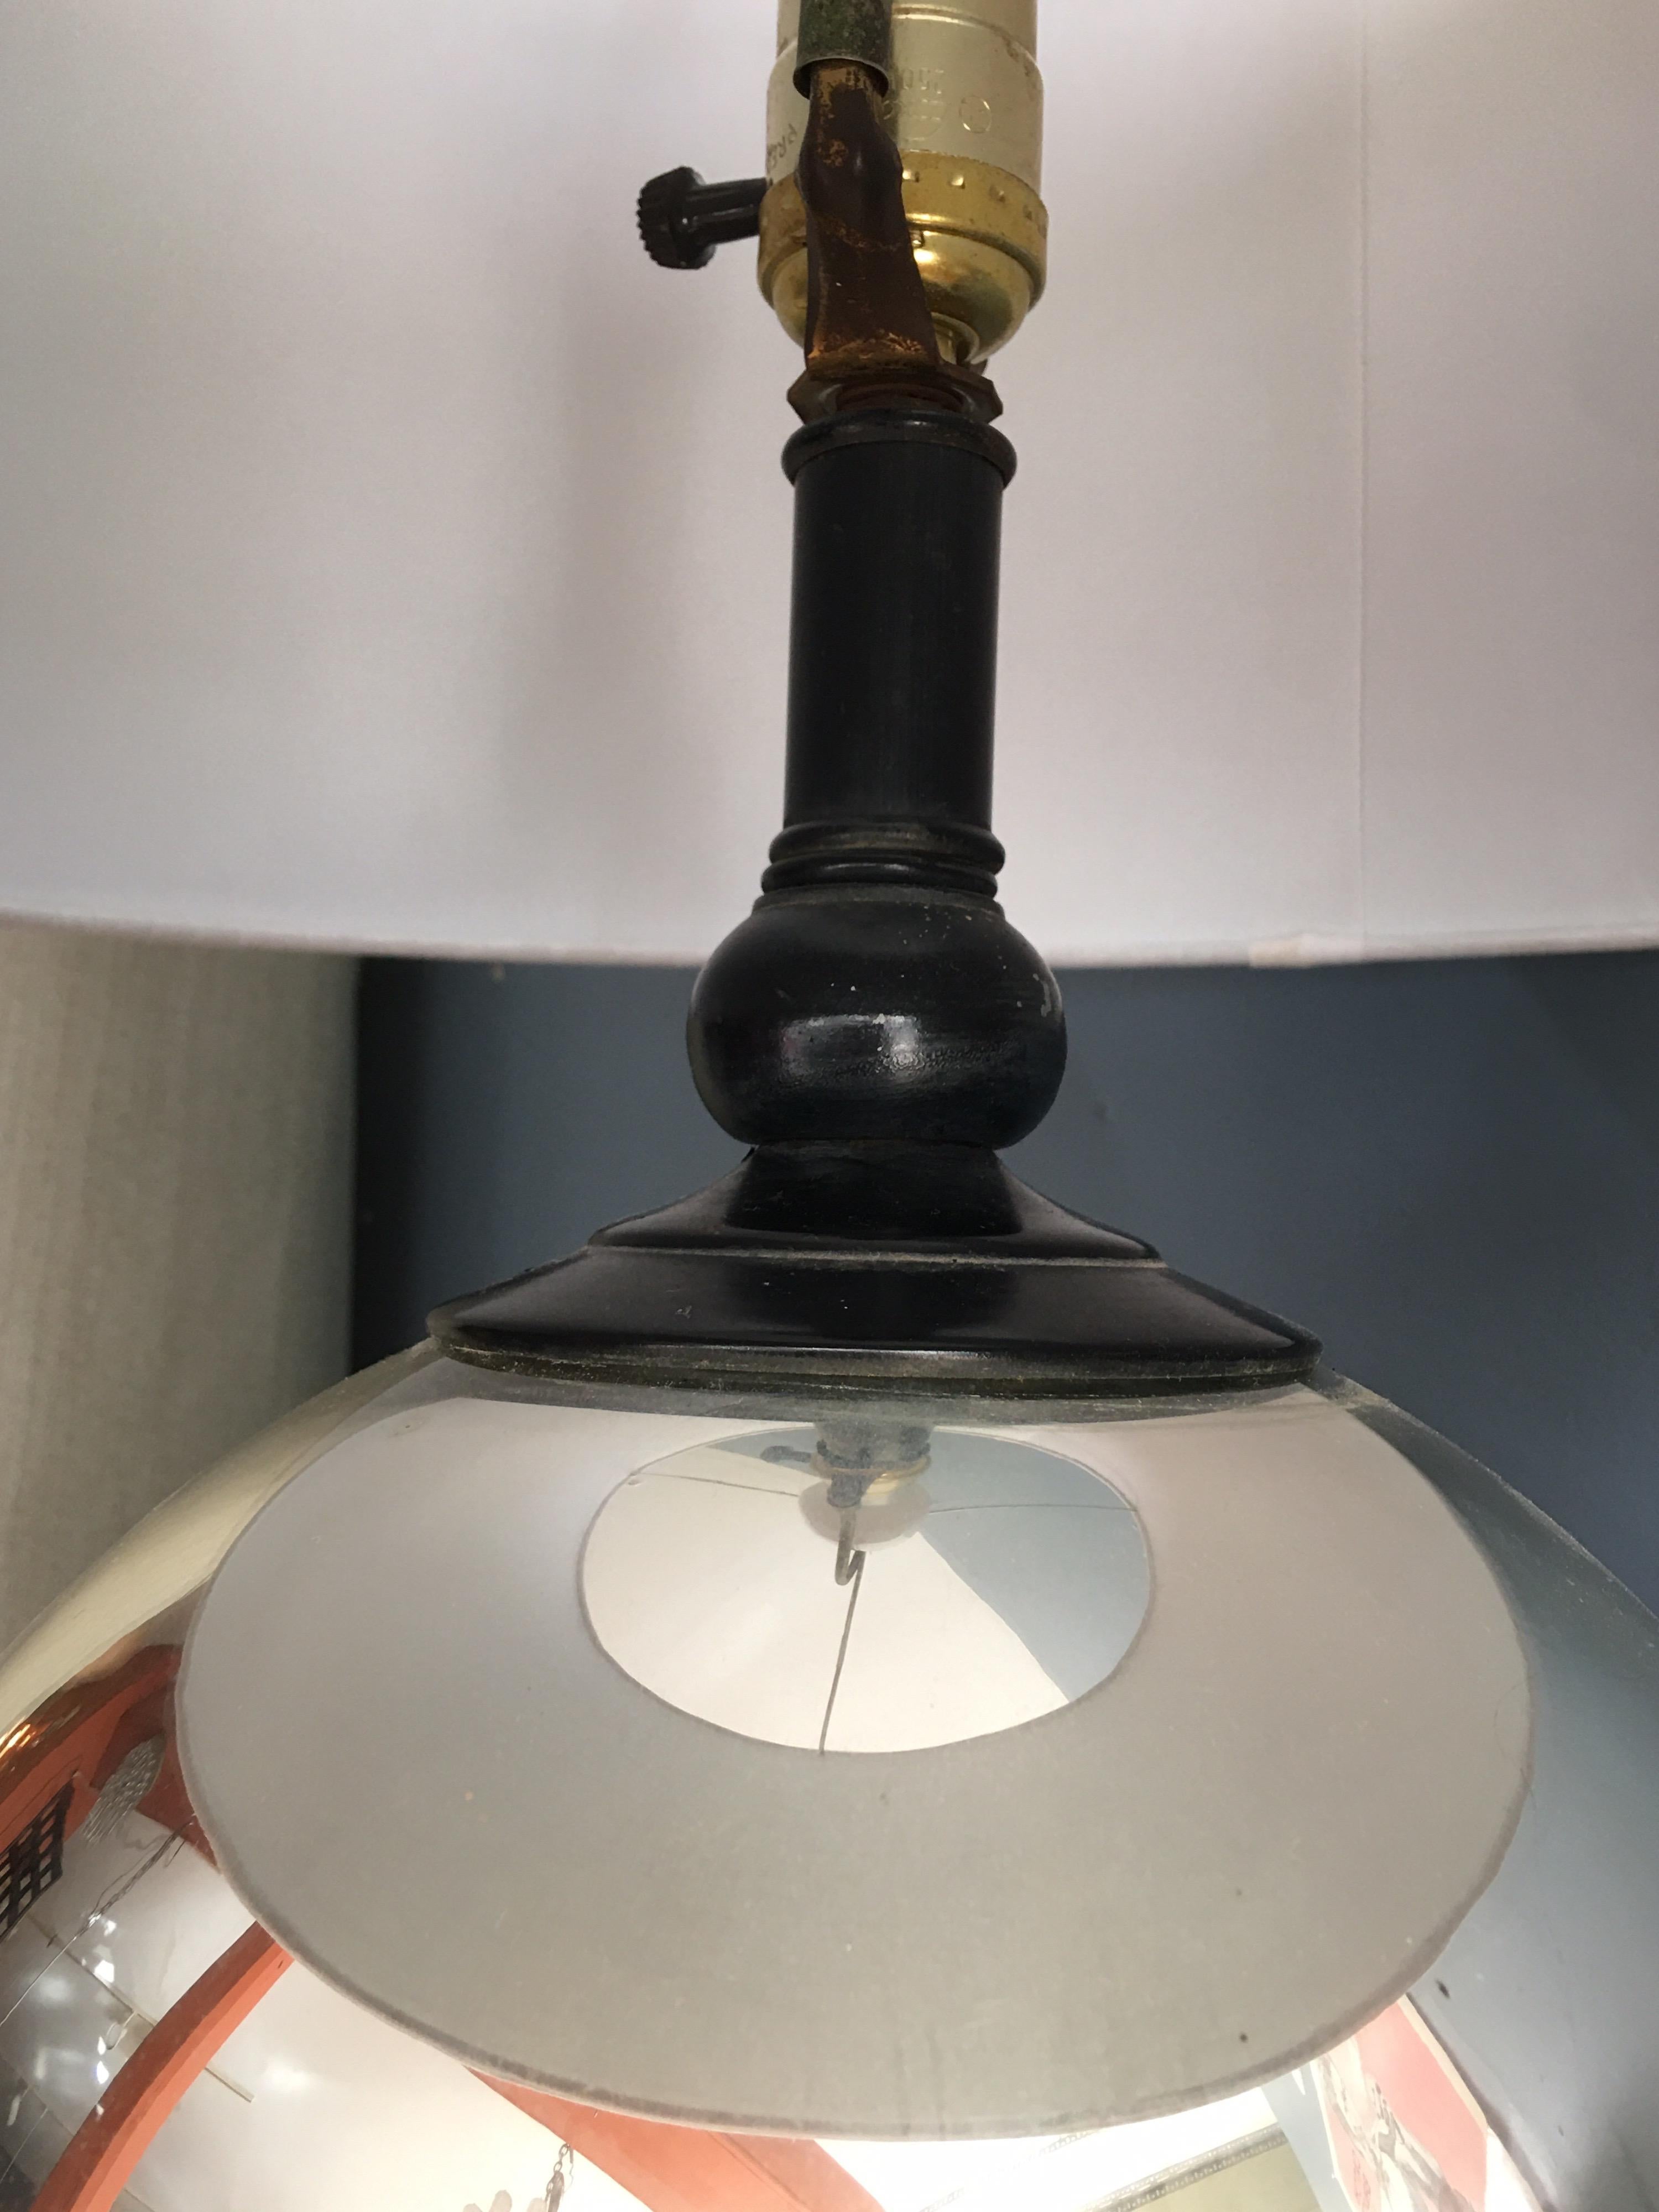 Mercury glass round ball table lamp. Nice size and classic shape. Has black metal base and neck fittings. Perfect to mix and match in both modern or traditional interiors!